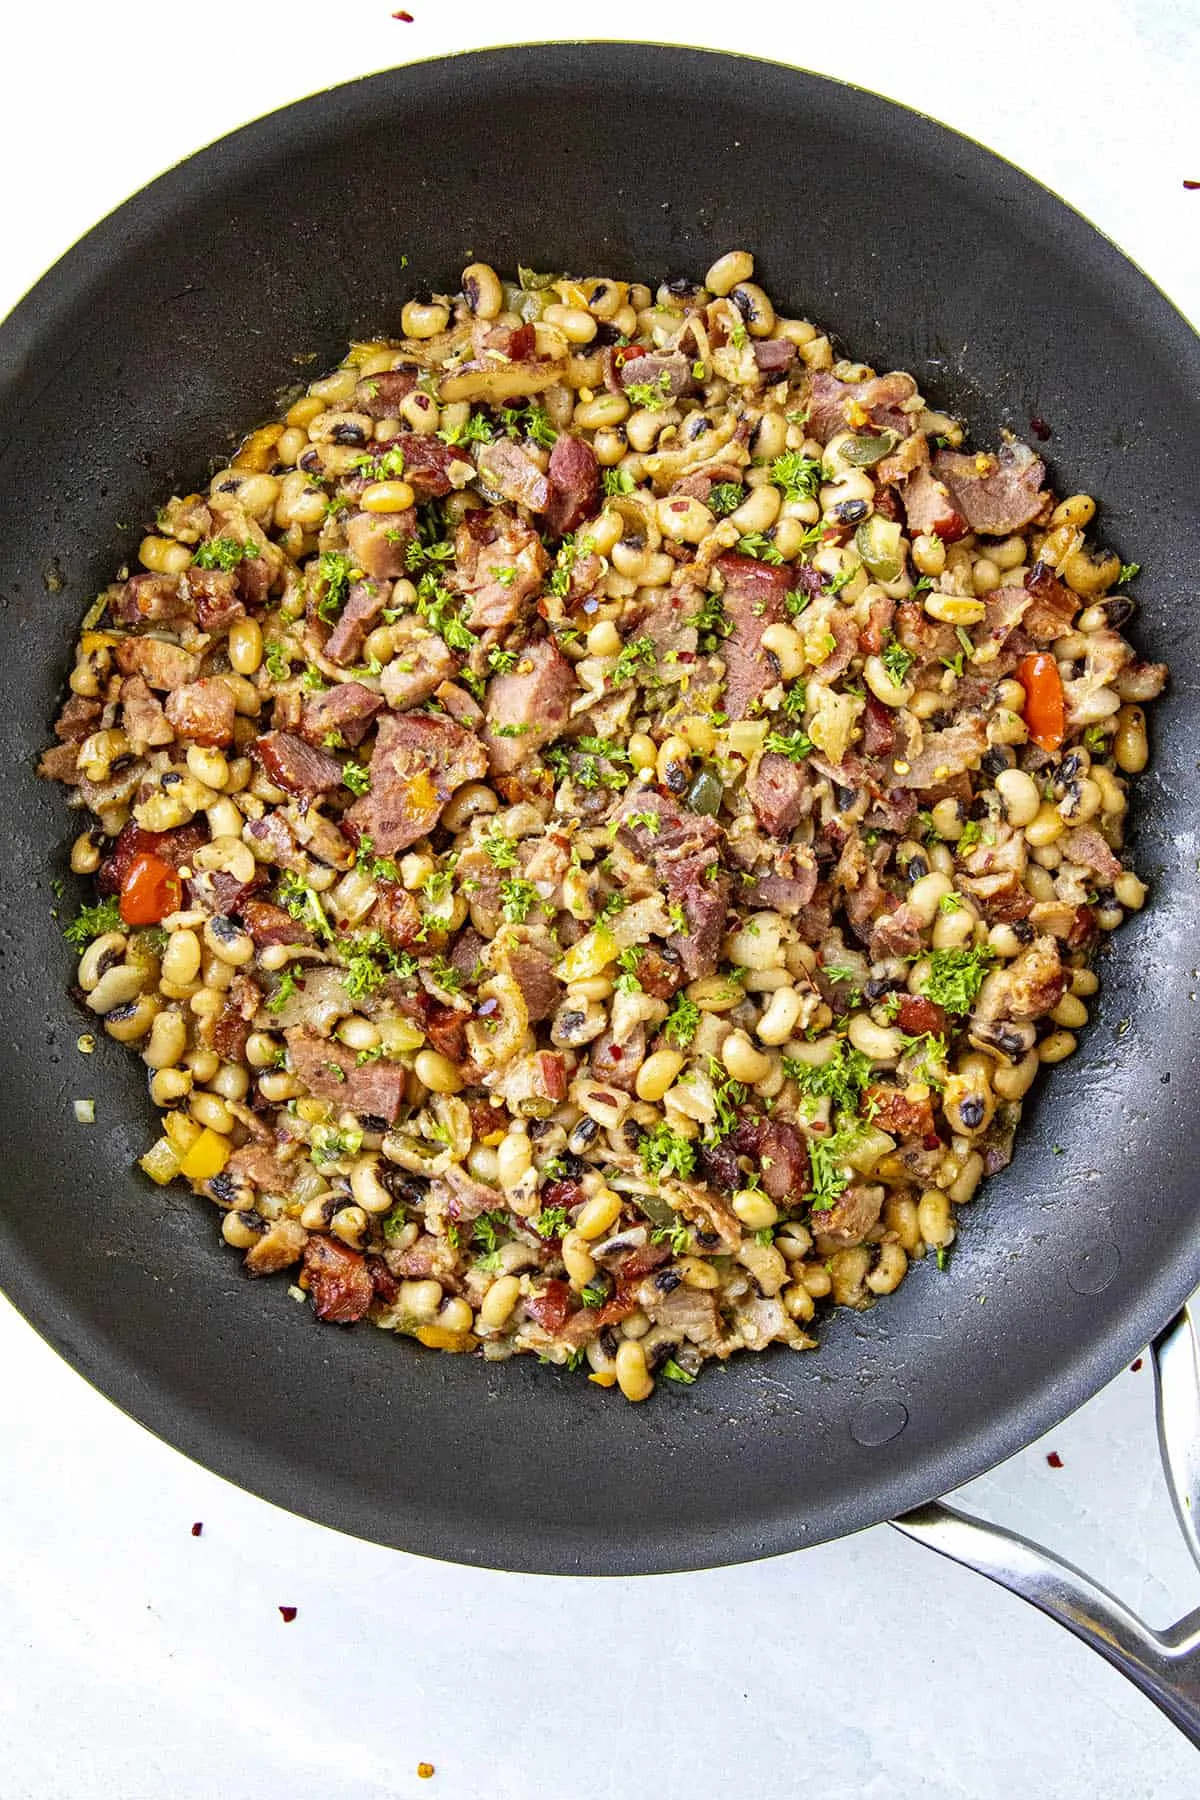 Black Eyed Peas in a pan, ready to serve